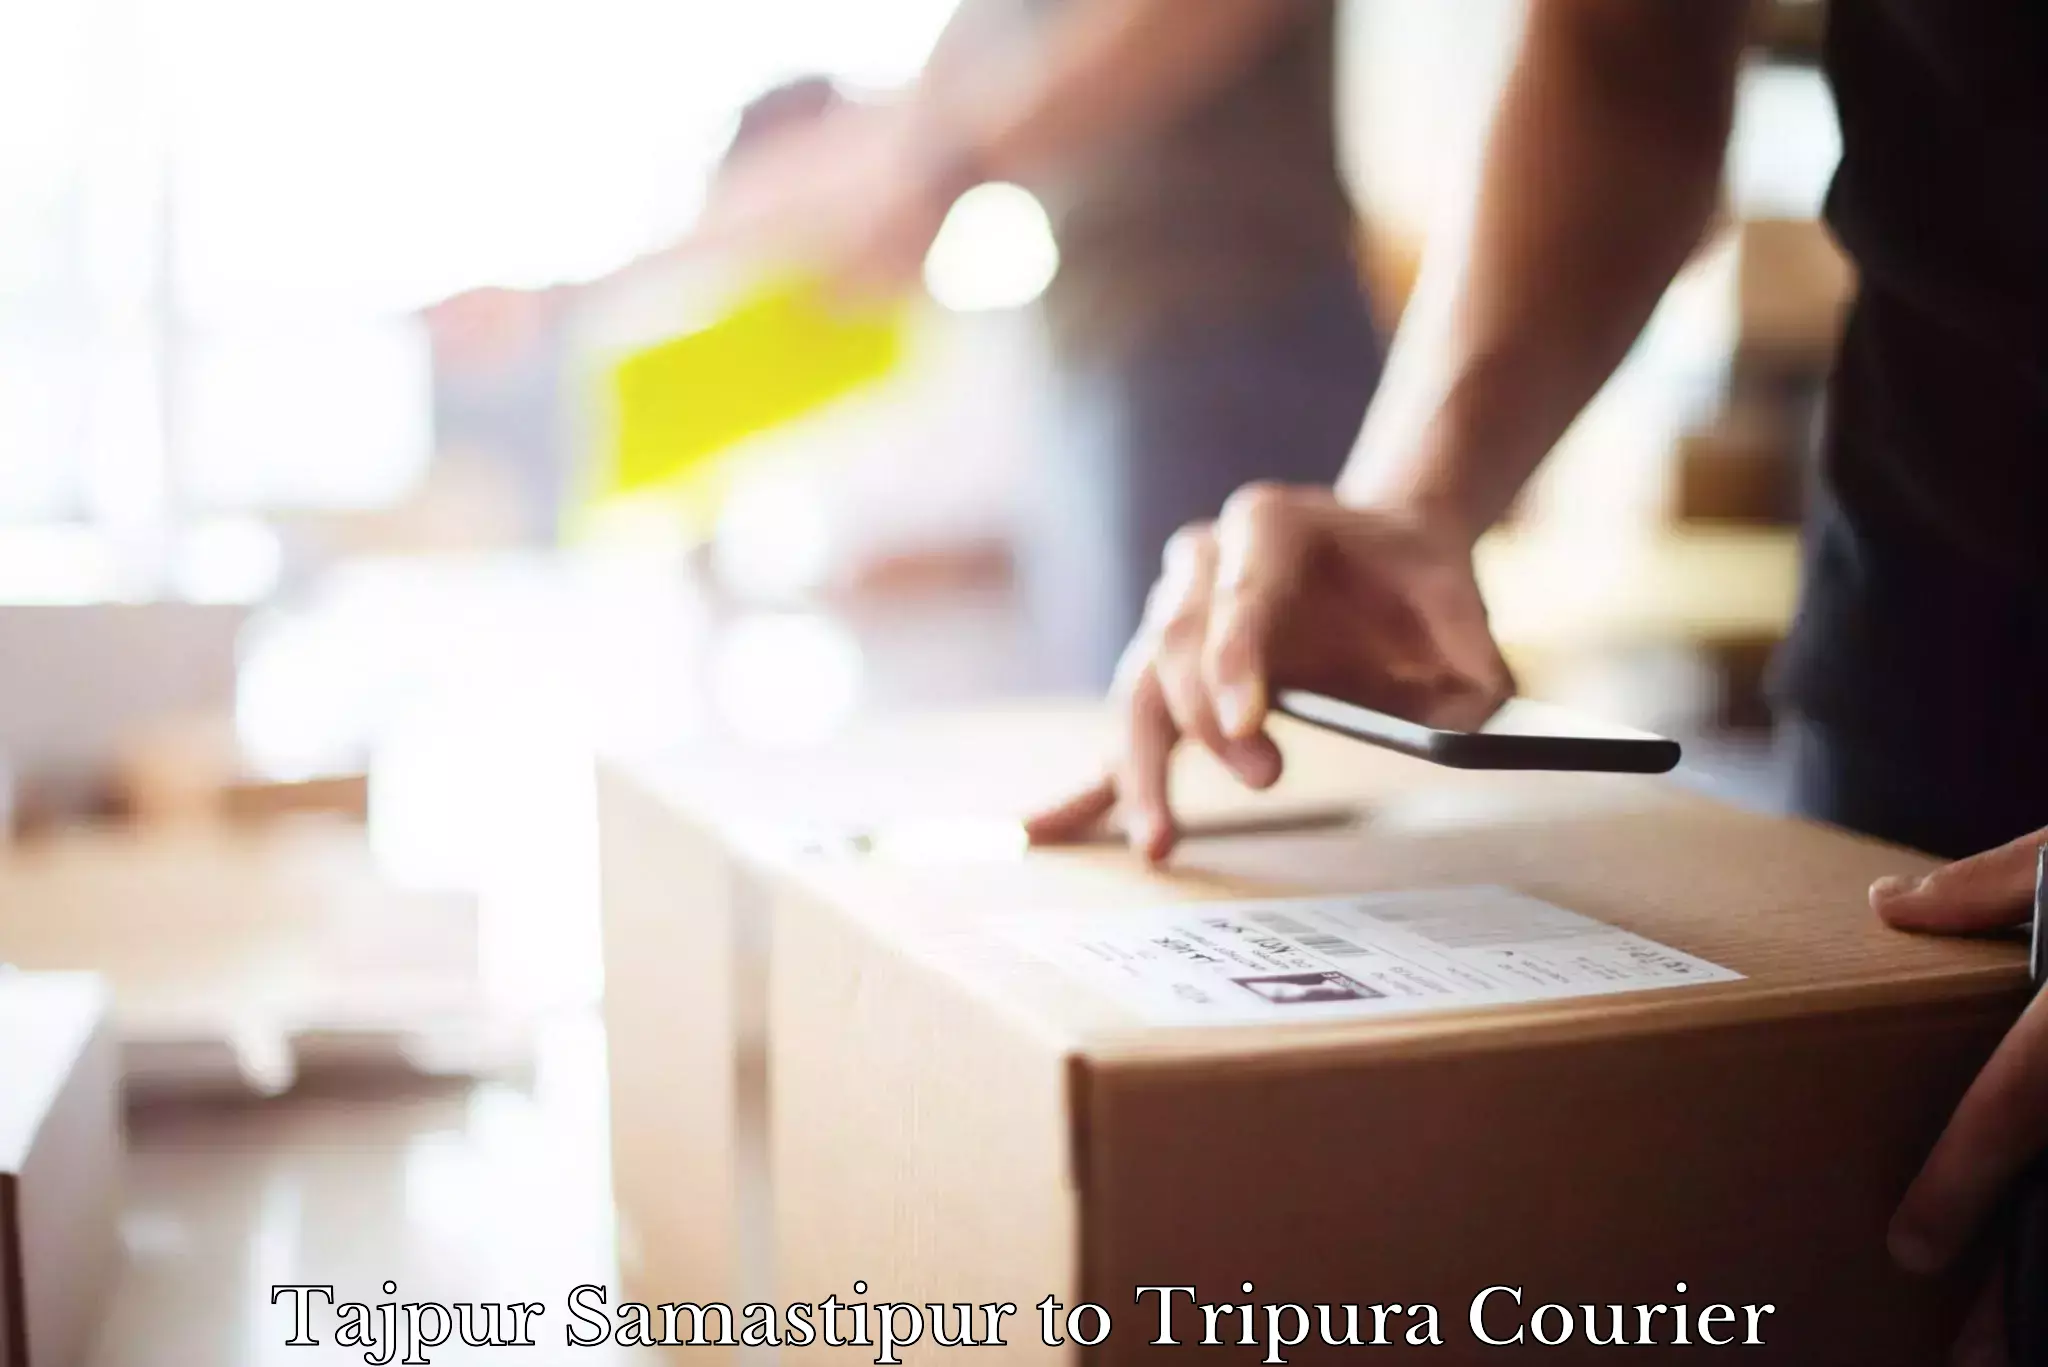 Next-day delivery options in Tajpur Samastipur to Tripura